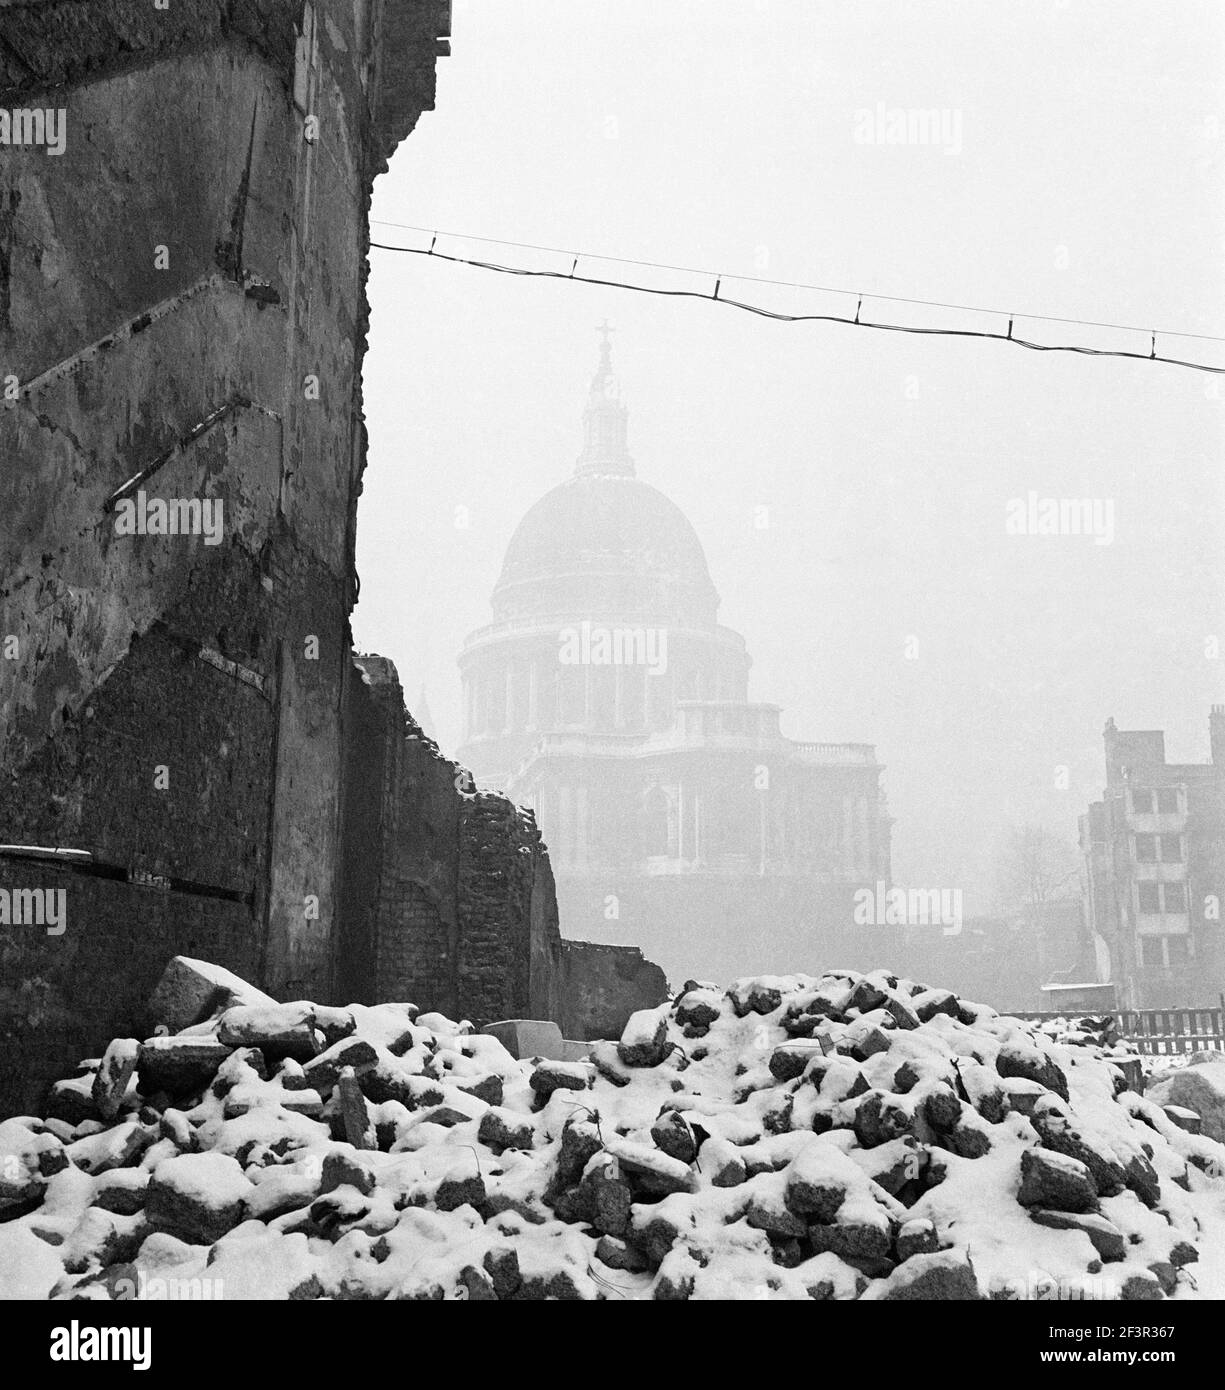 ST PAUL'S CATHEDRAL, London. The cathedral in mist with the snow-covered ruins of a bomb damaged building in the foreground.  Photographed by John Gay Stock Photo